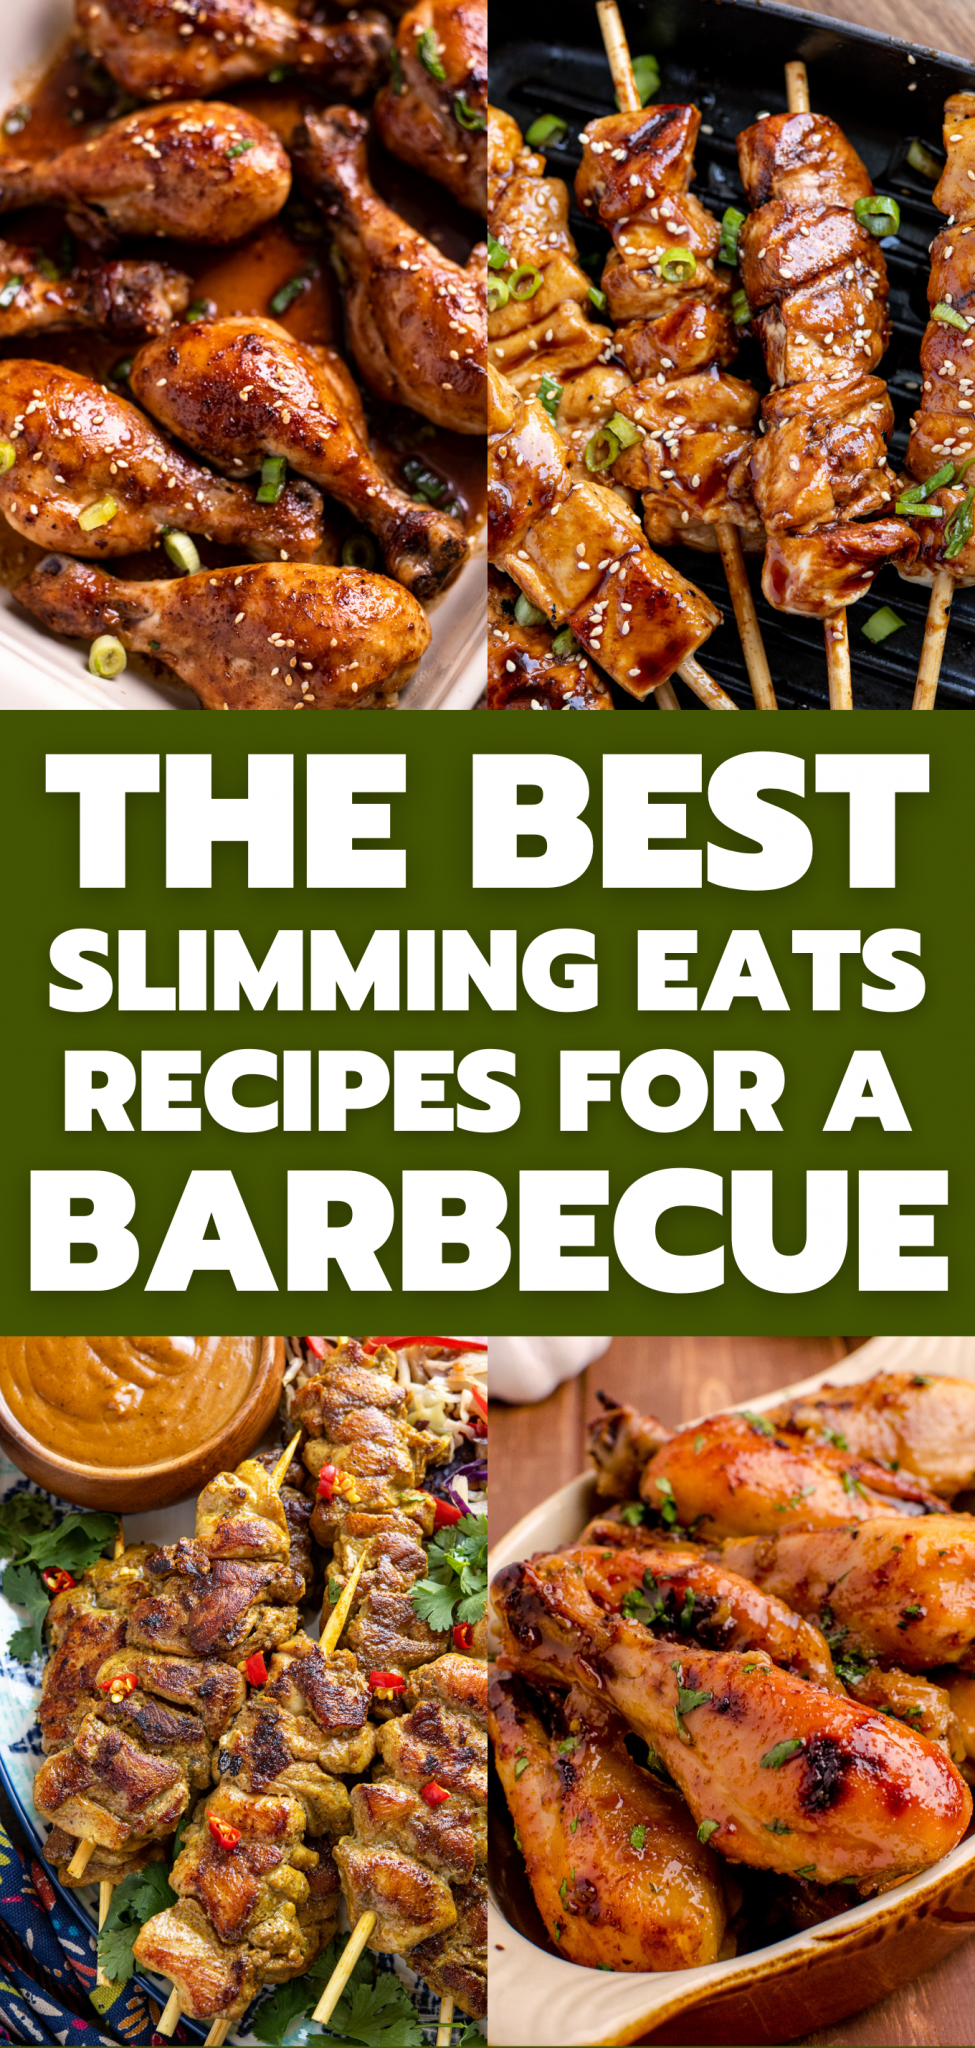 pin image image of recipes for a barbecue from Slimming Eats